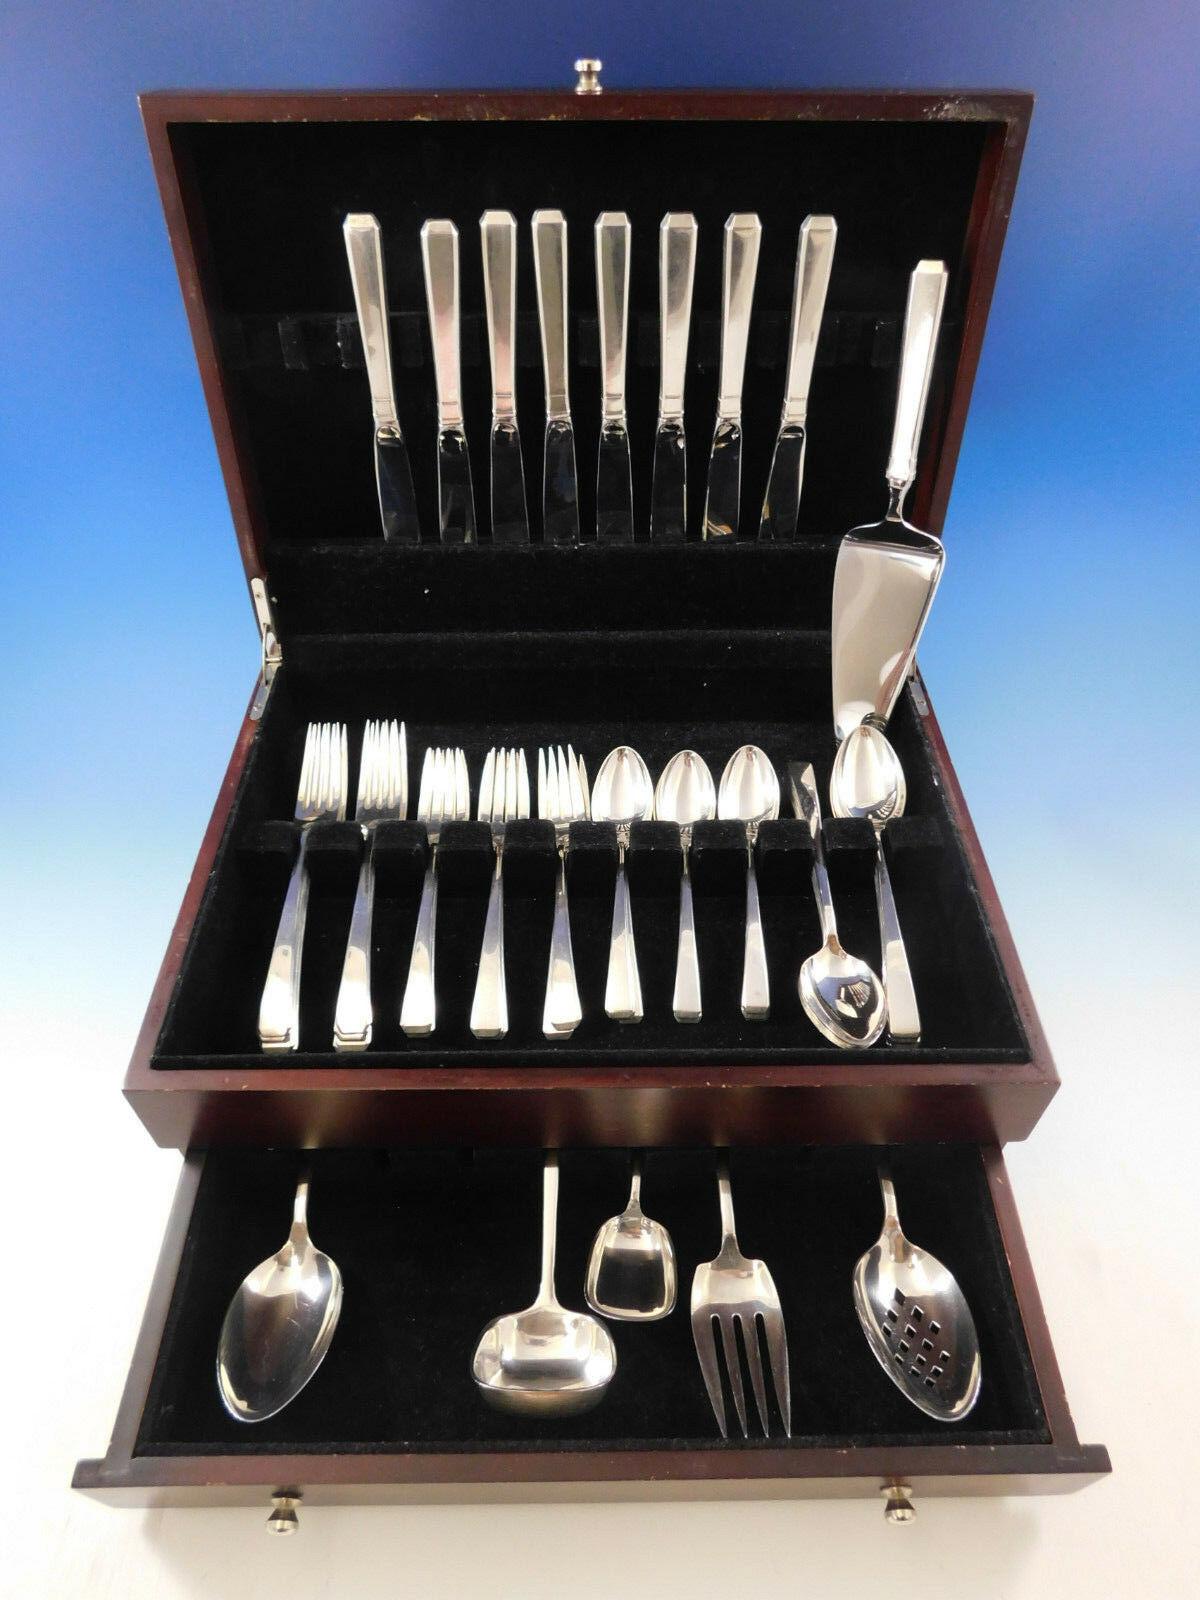 Craftsman by Towle sterling silver flatware set, 46 pieces. This set includes:

8 knives, 8 5/8